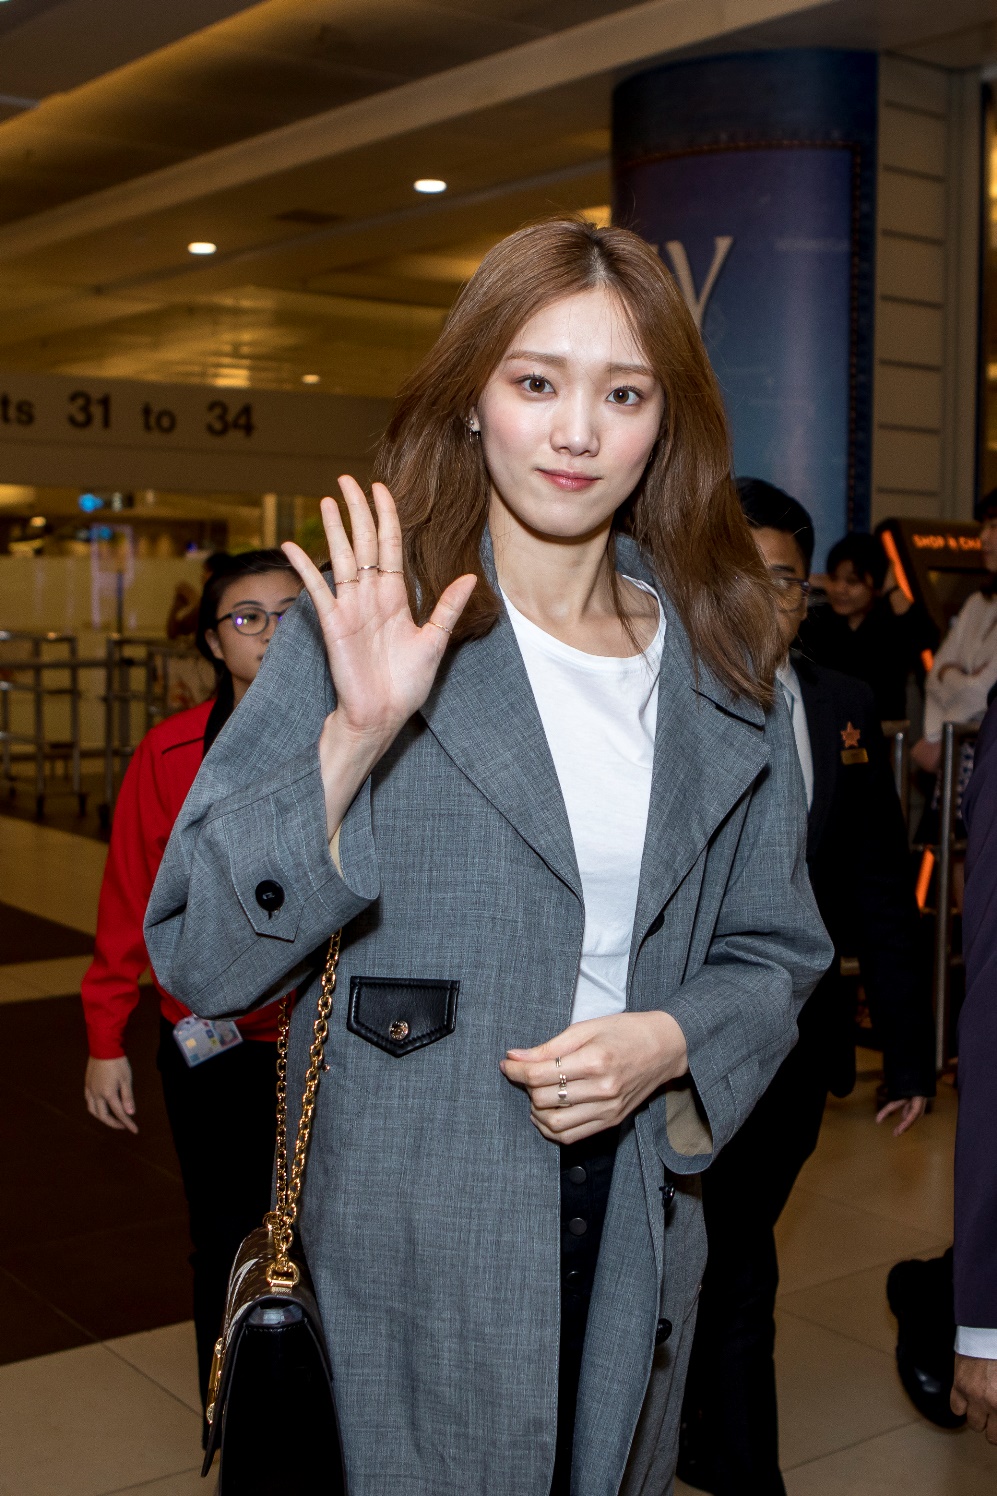 Lee Sung Kyung arrives in Singapore to attend Louis Vuitton Time ...